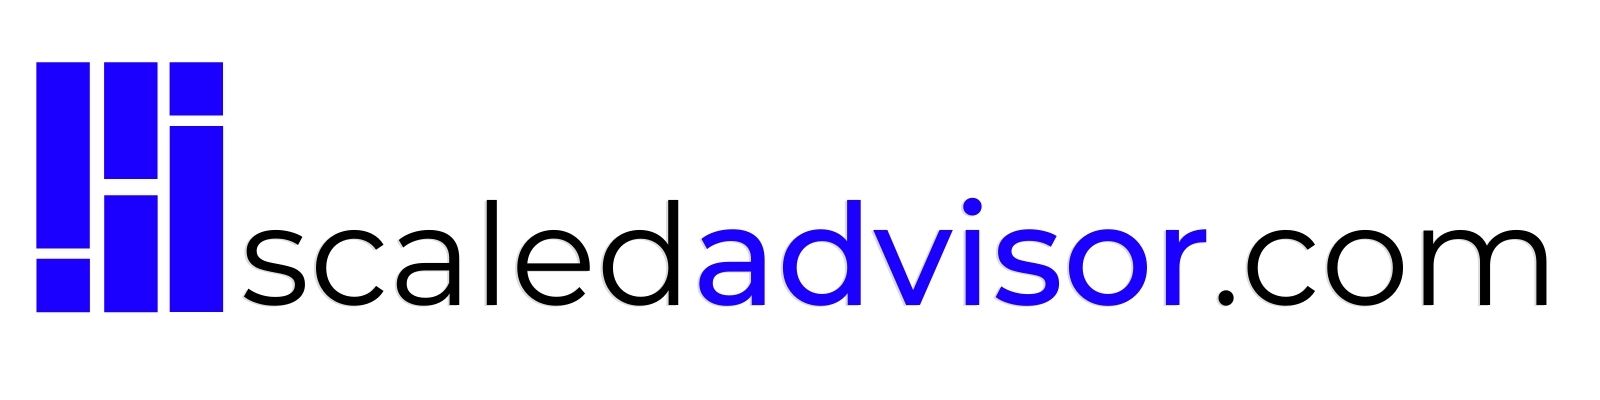 How Scaledadvisor.com Uses Their AI-driven Platform to Generate and Qualify Leads For Financial Advisors.